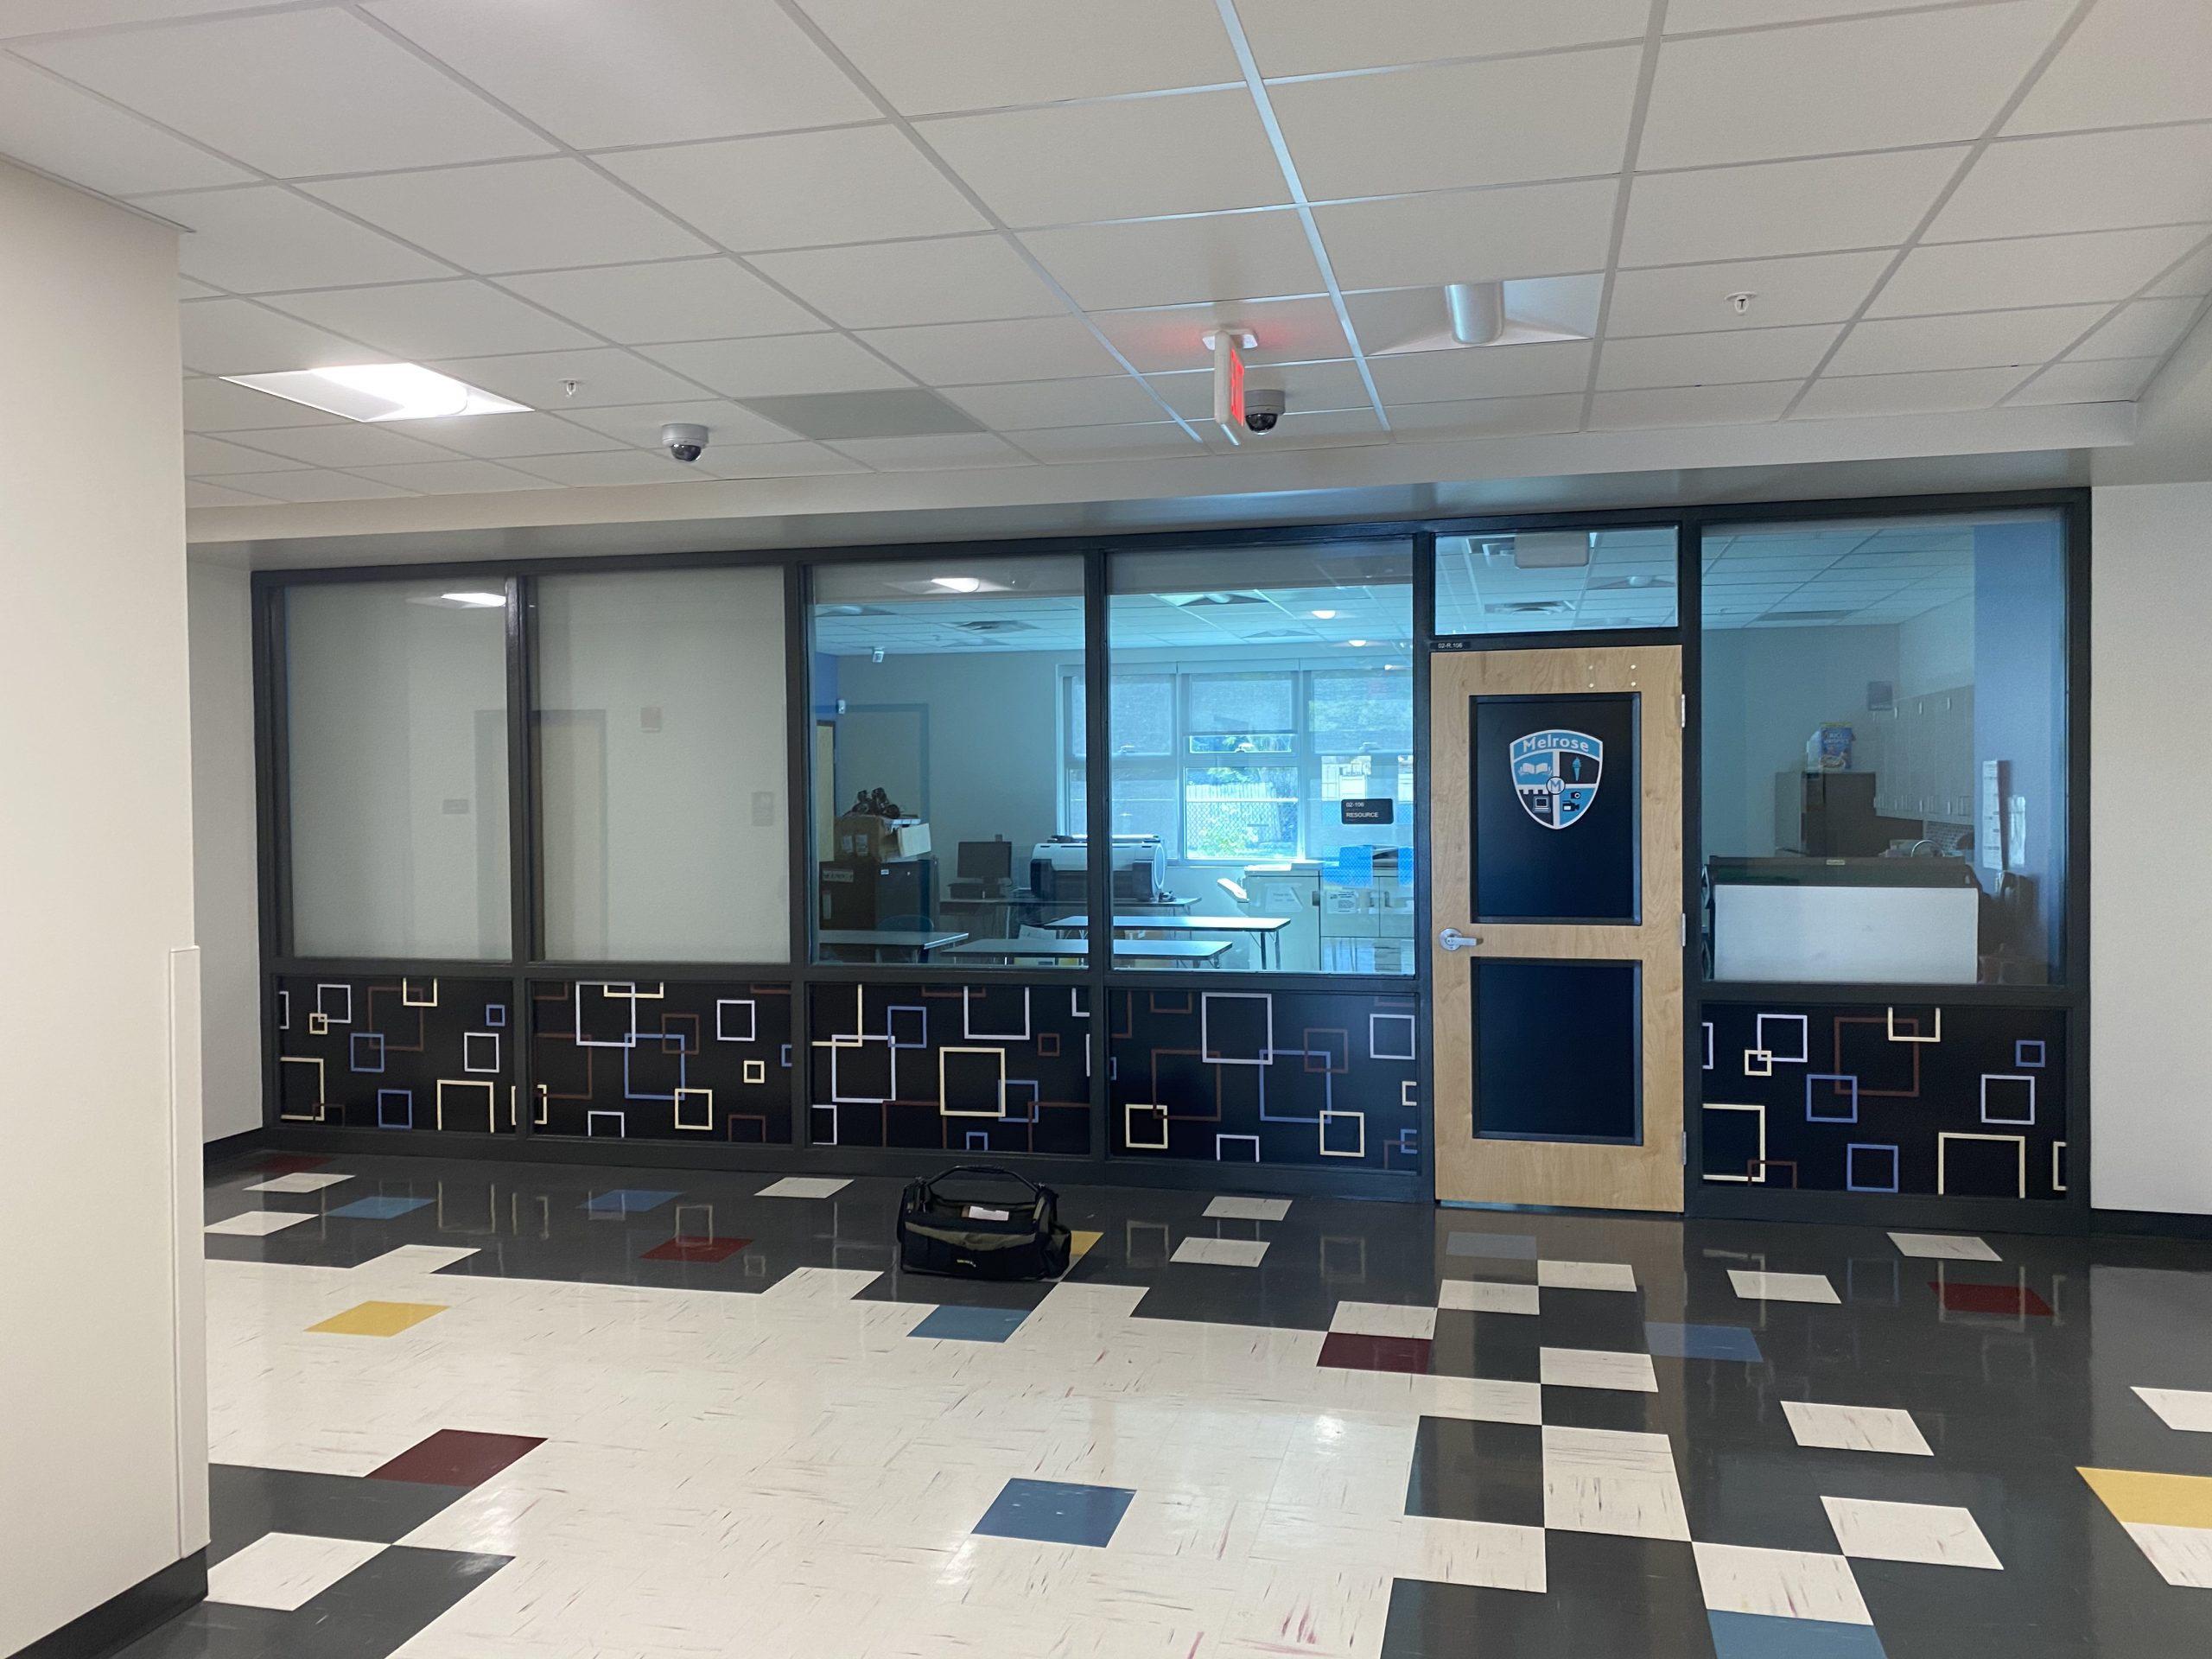 An office space transformed with our custom window frosting materials and installation (Tampa Bay)